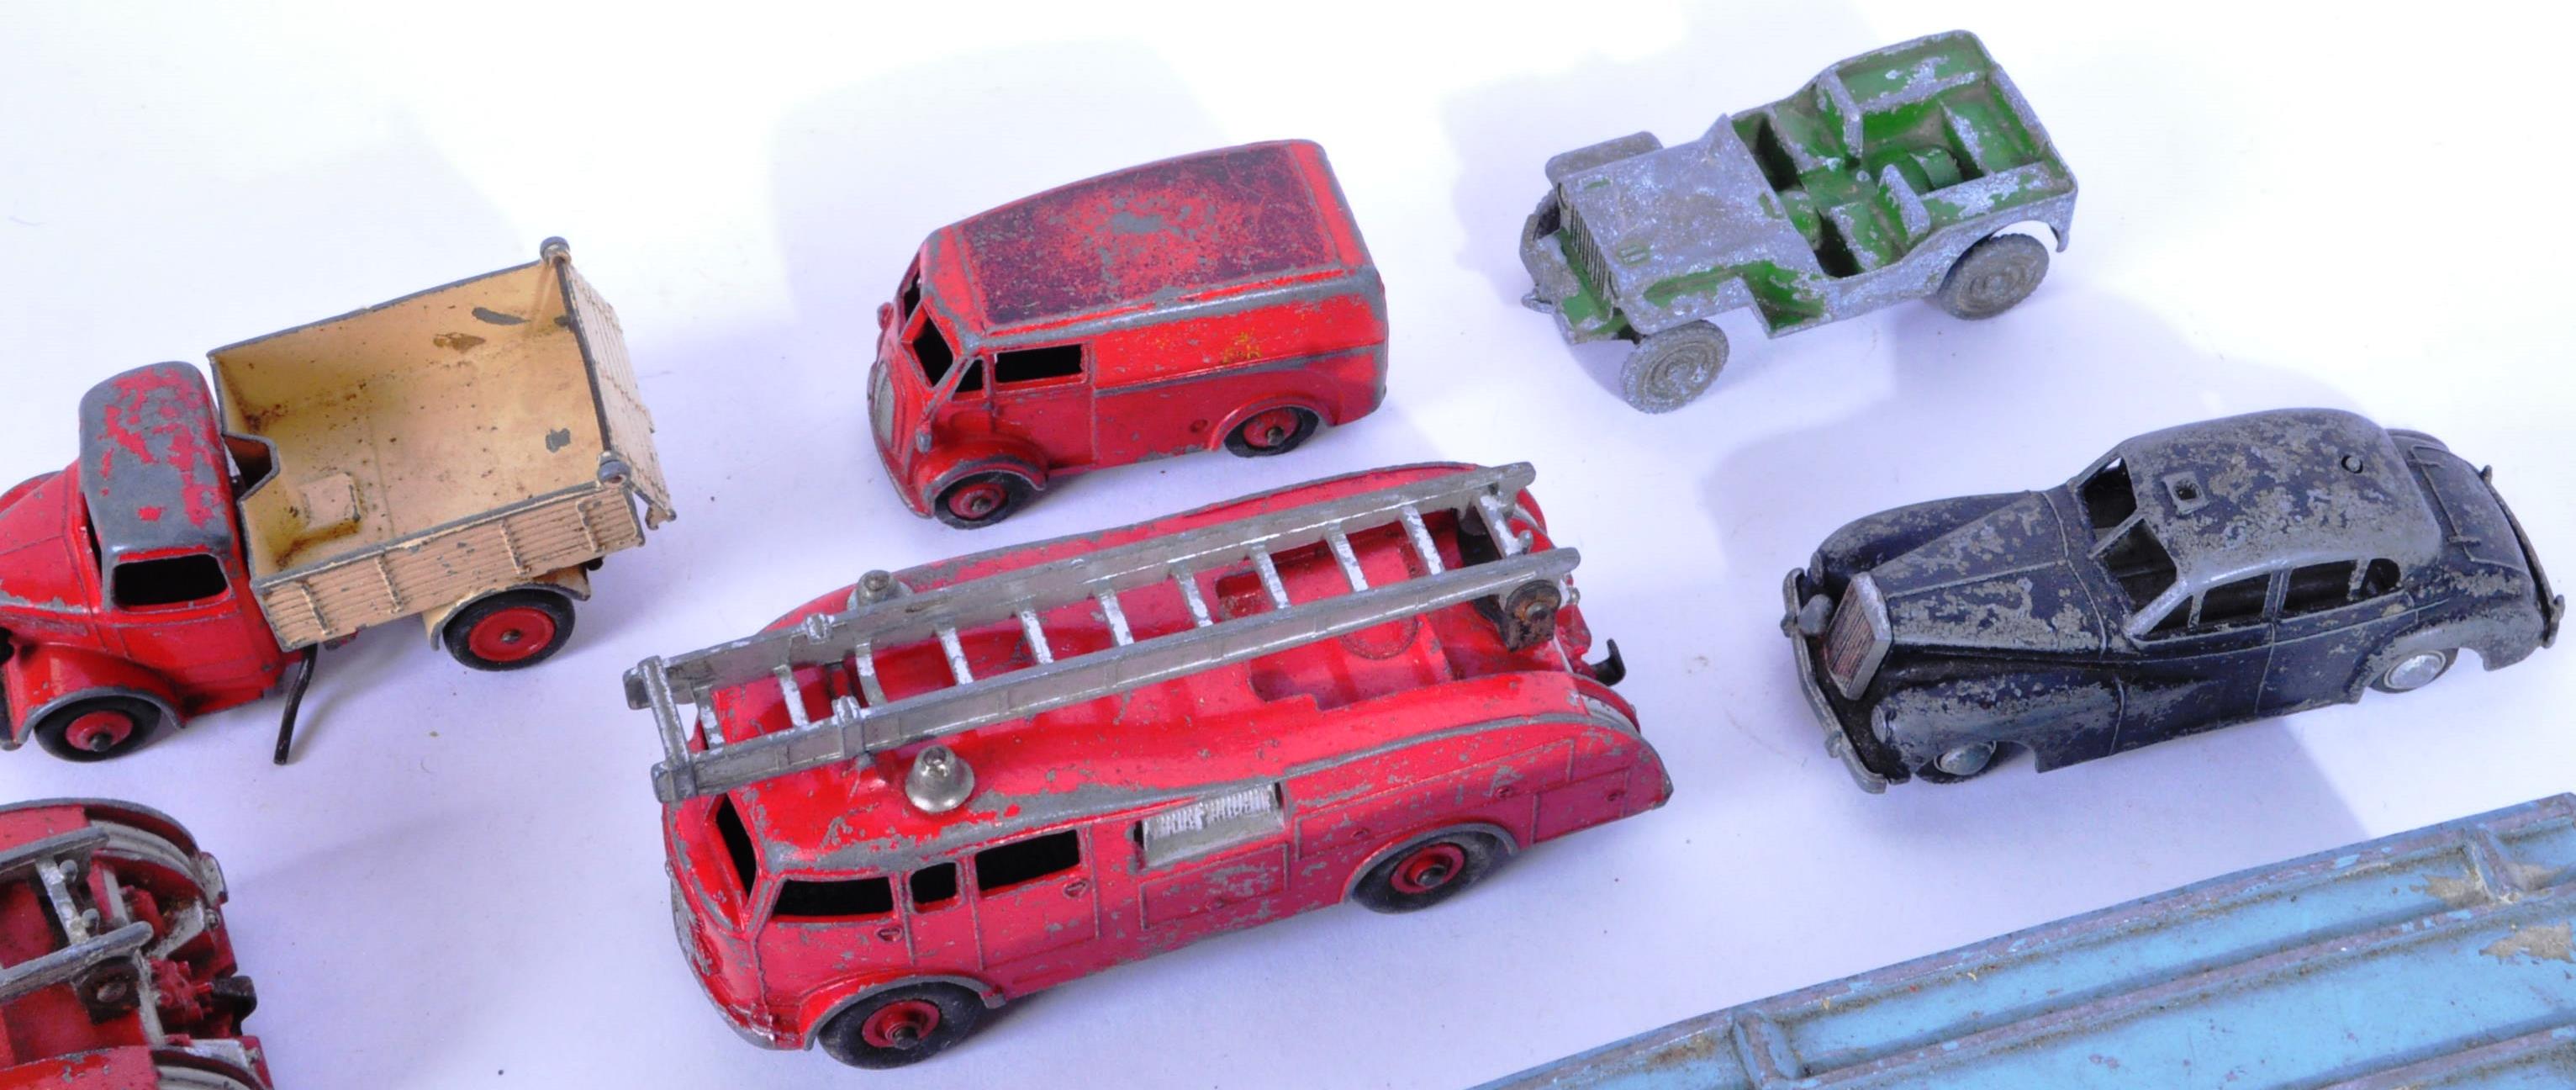 LARGE COLLECTION OF ASSORTED VINTAGE DIECAST MODELS - Image 3 of 6